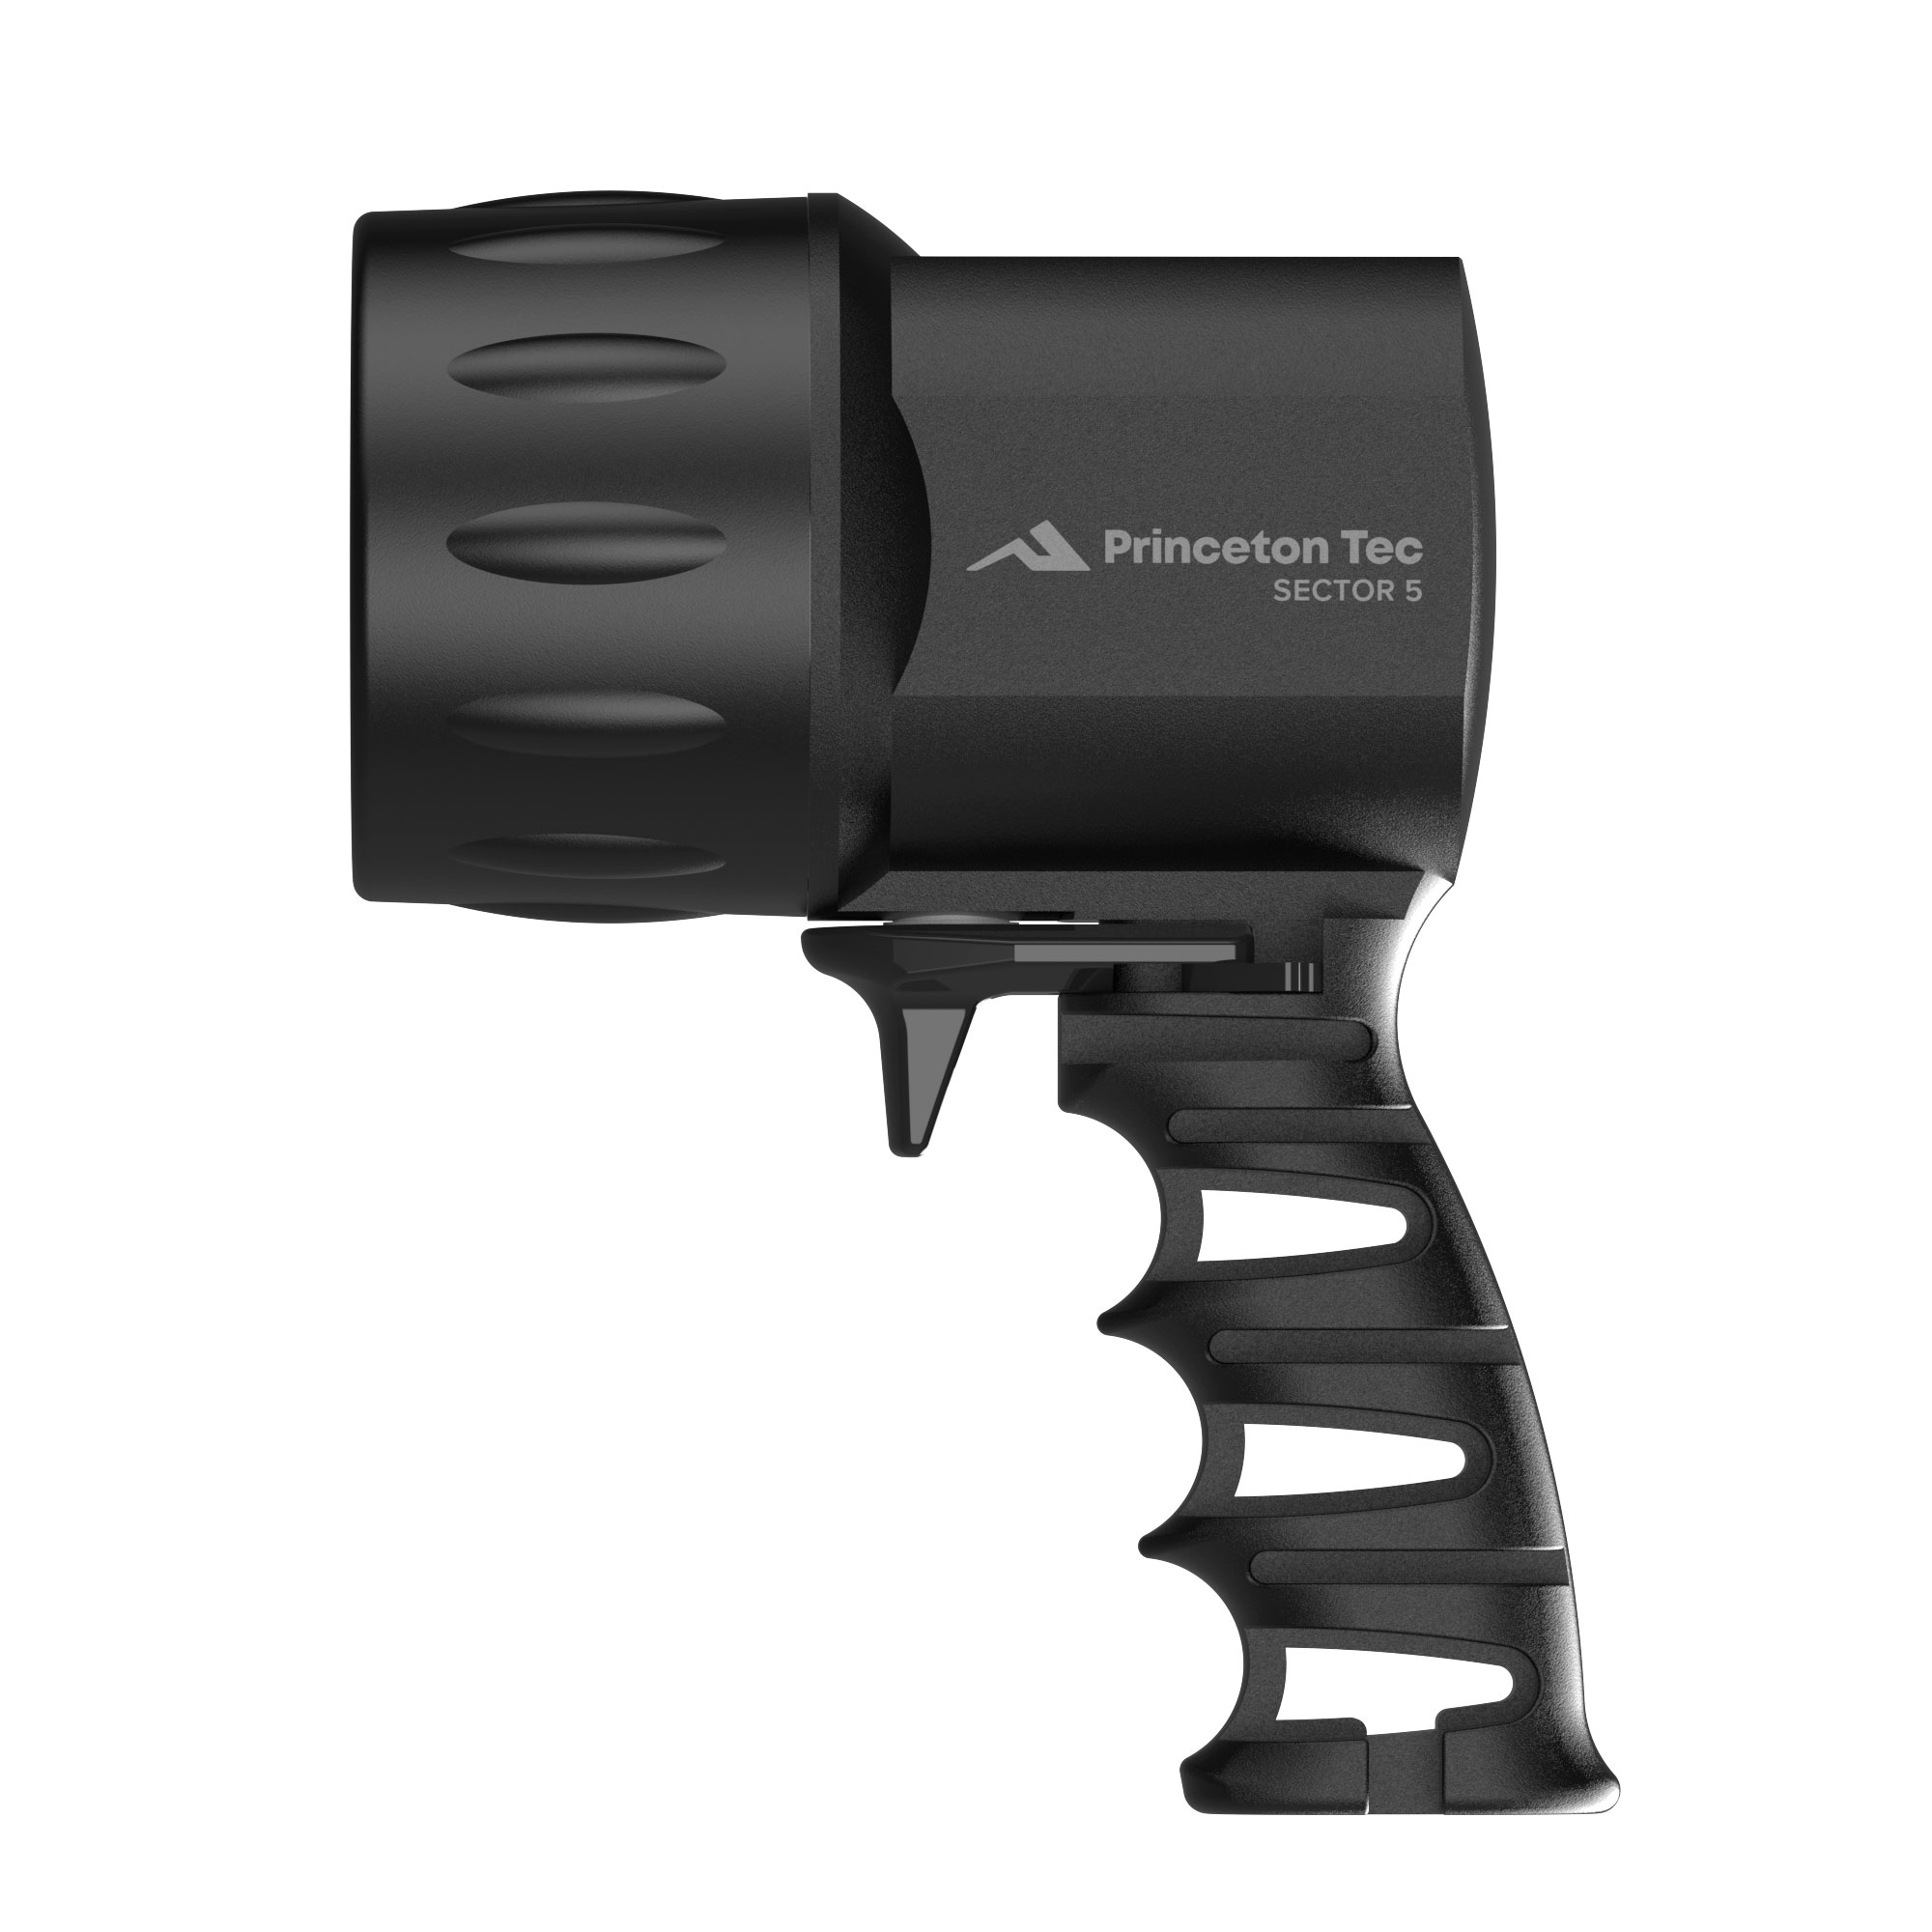 Princeton Tec Sector LED Flashlights Up to $6.00 Off w/ Free Shipping